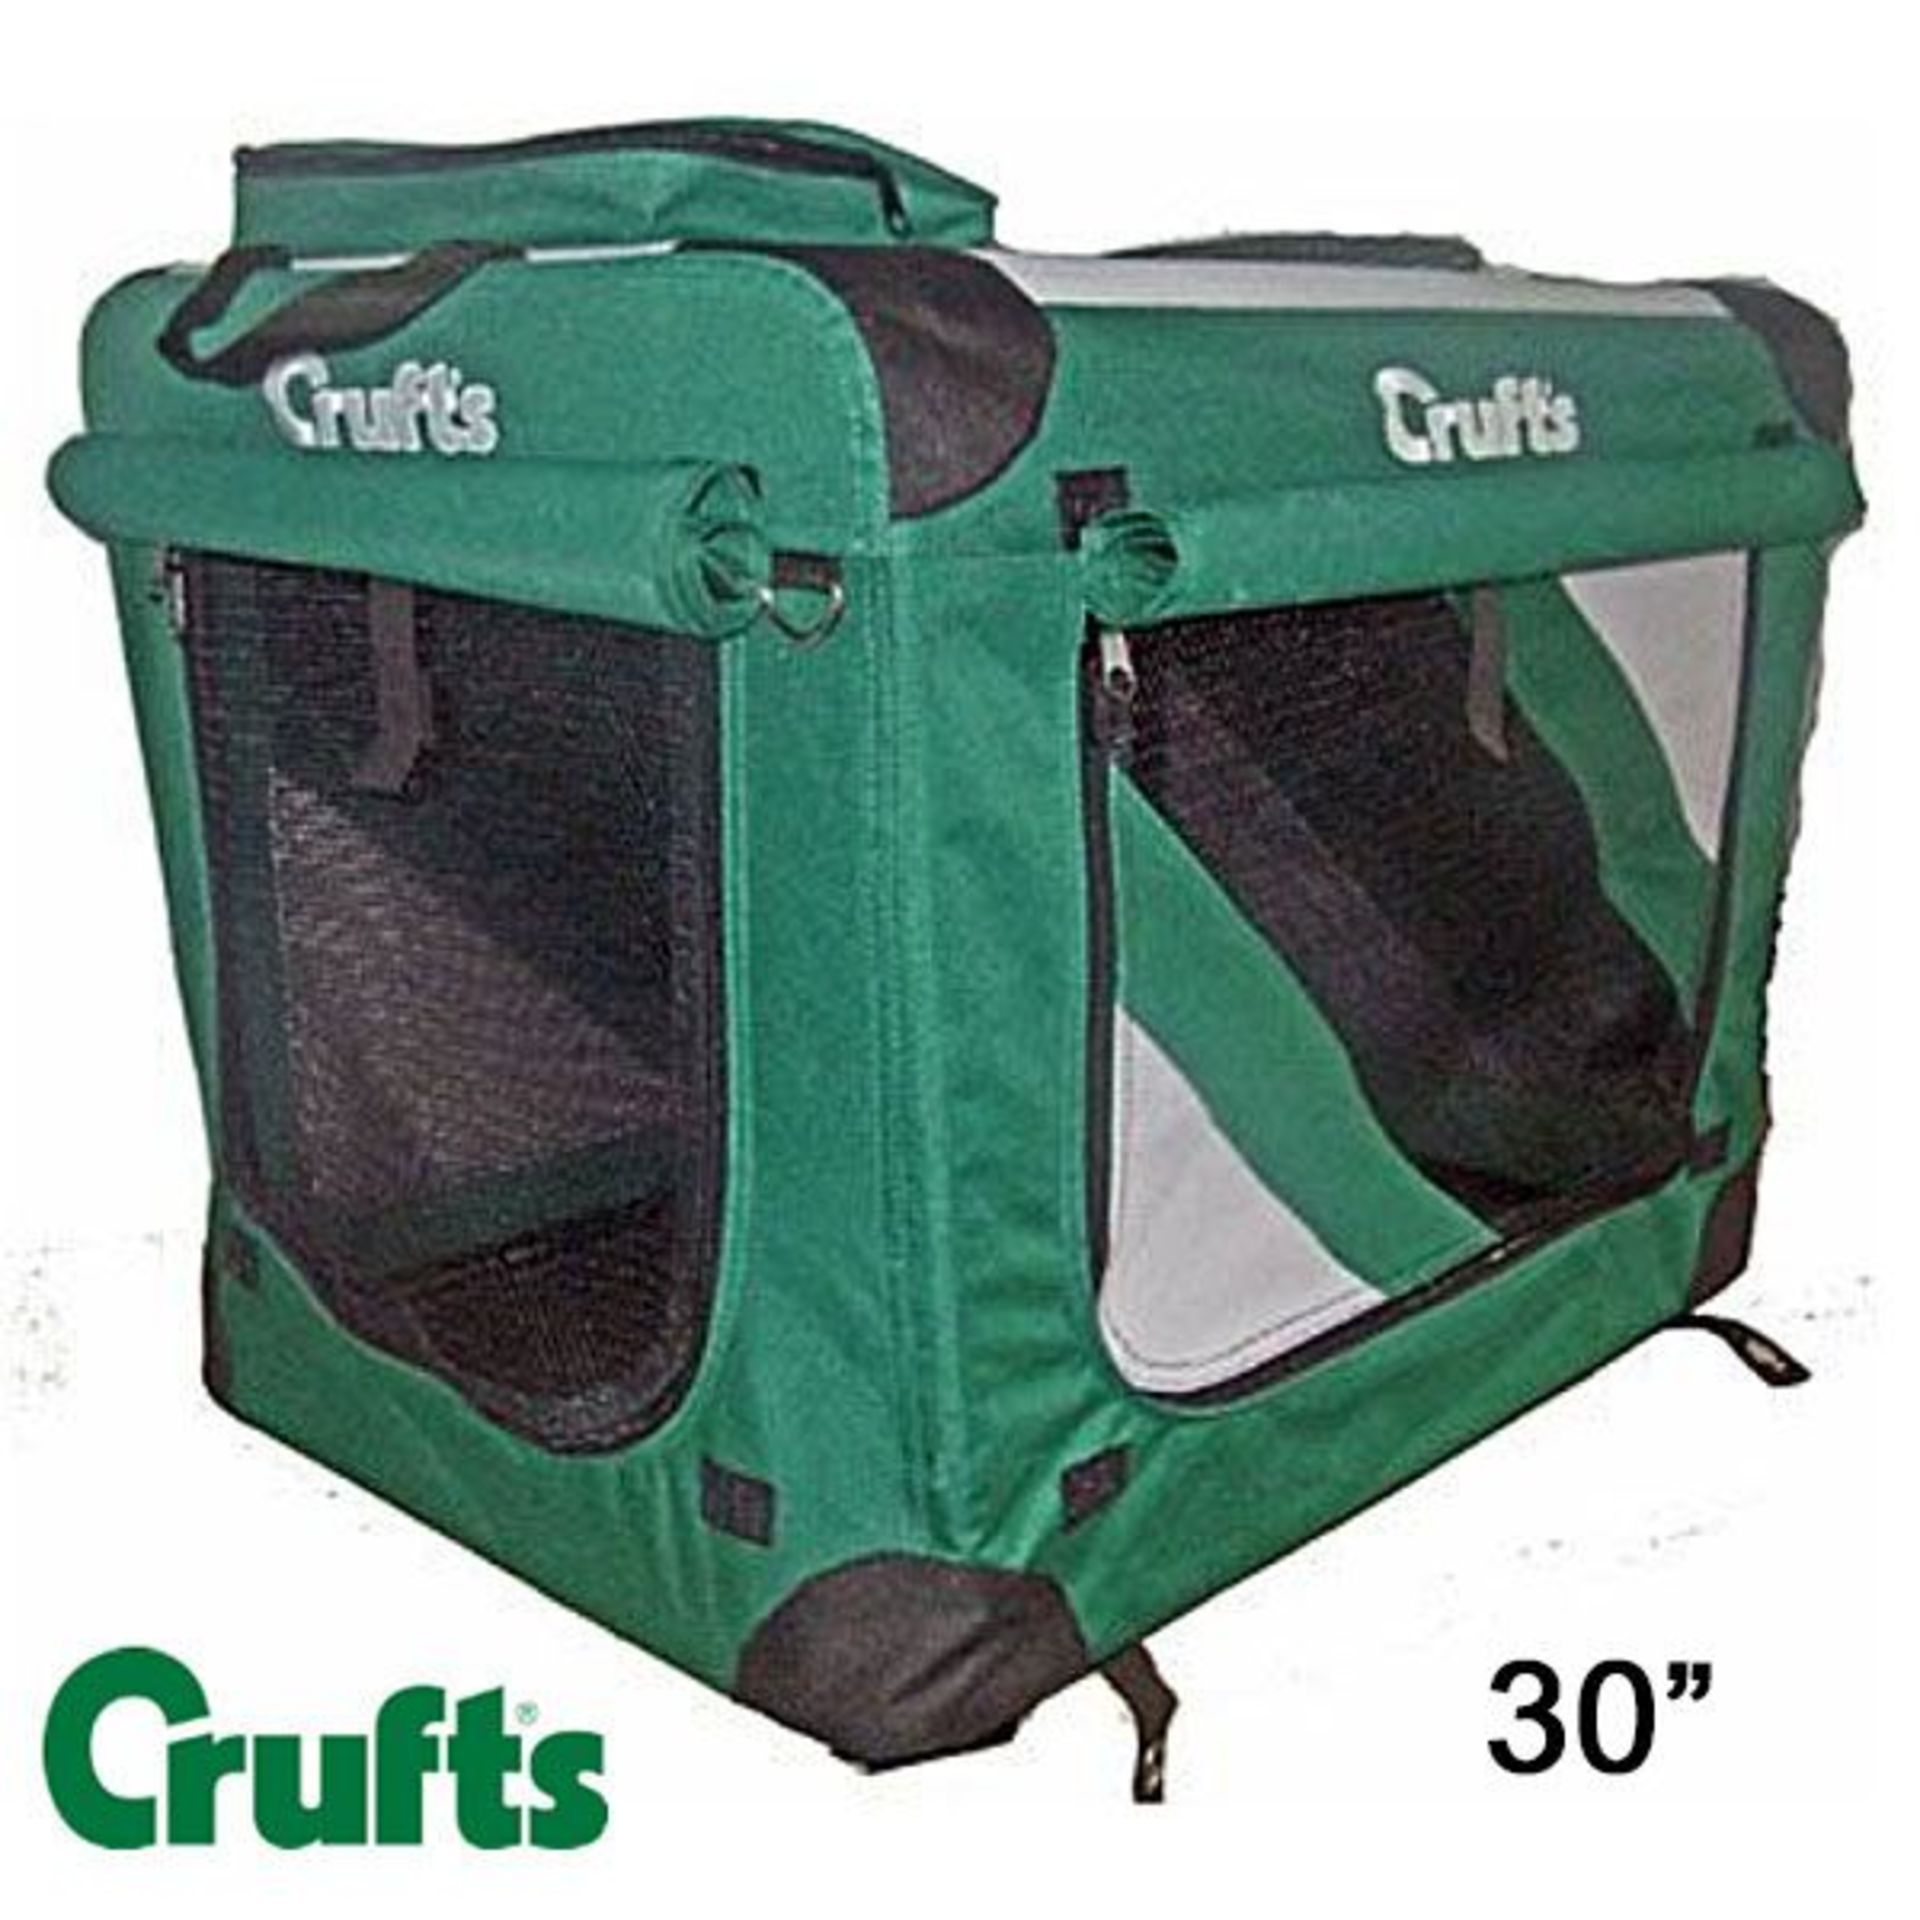 43 x 30" Crufts Soft Crate. Green/Grey. Total RRP £3,010